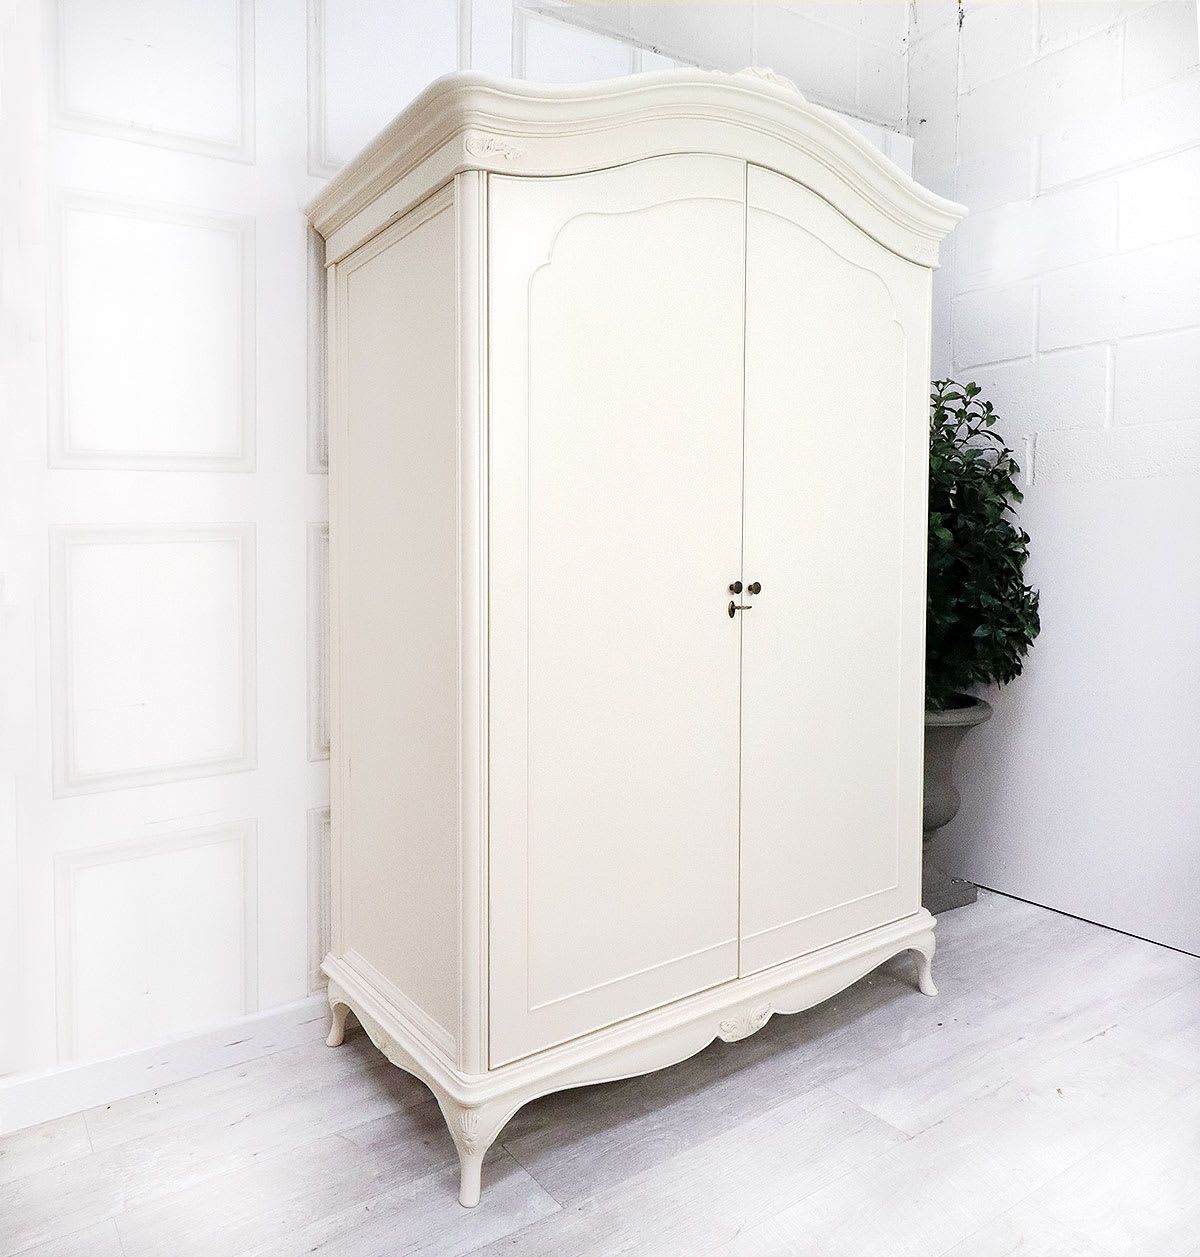 Willis & Gambier French Style Ivory Large Armoire Wardrobe | Nicky Cornell  A Uk Stockist Pertaining To French Armoires And Wardrobes (Gallery 4 of 20)